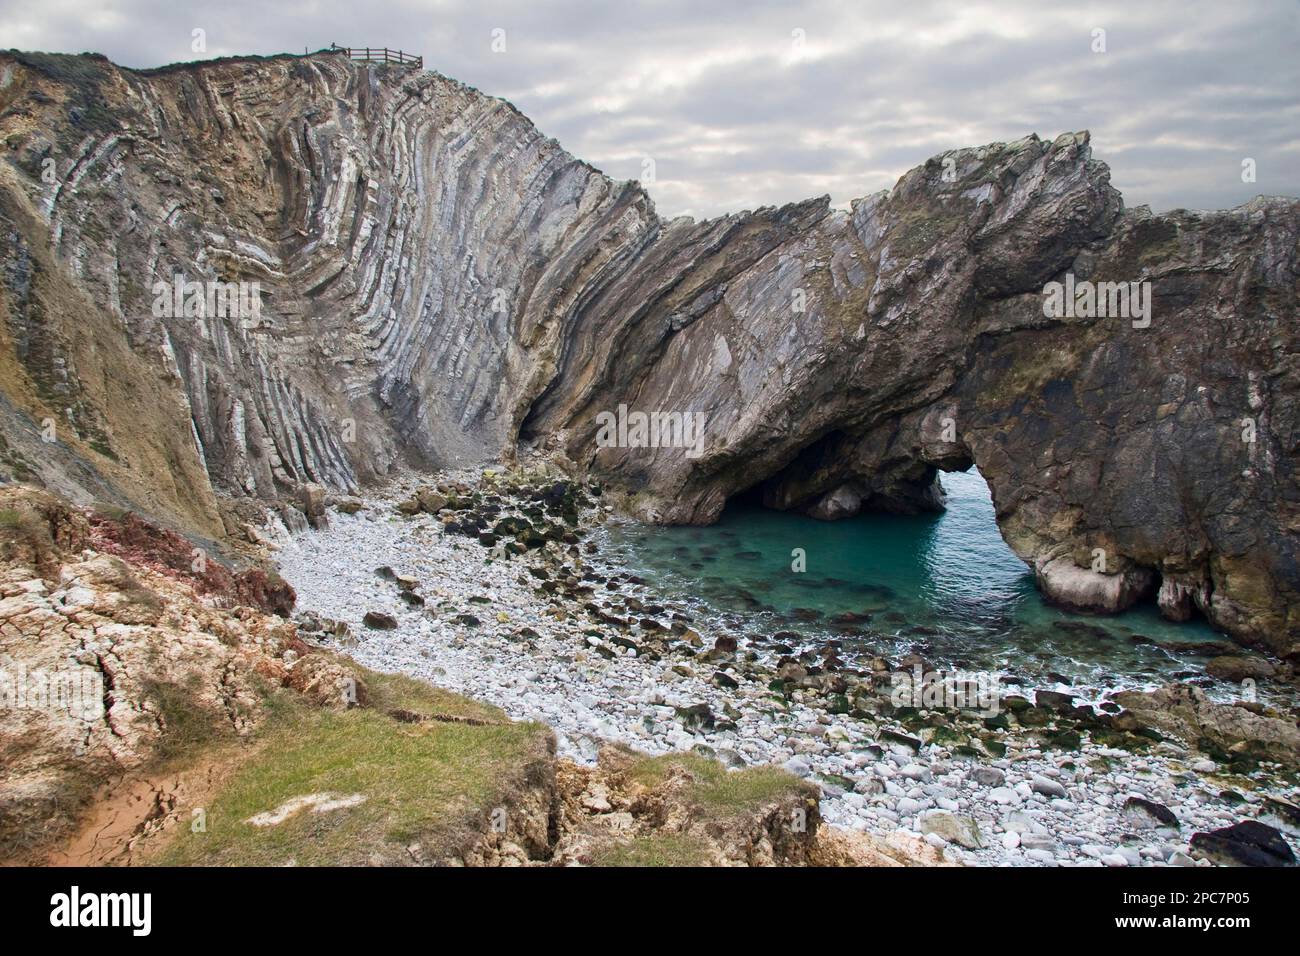 Geological rock formations with rock folding and archways cut into softer rocks of the bay, Stair Hole, Dorset, England, Marsh Stock Photo